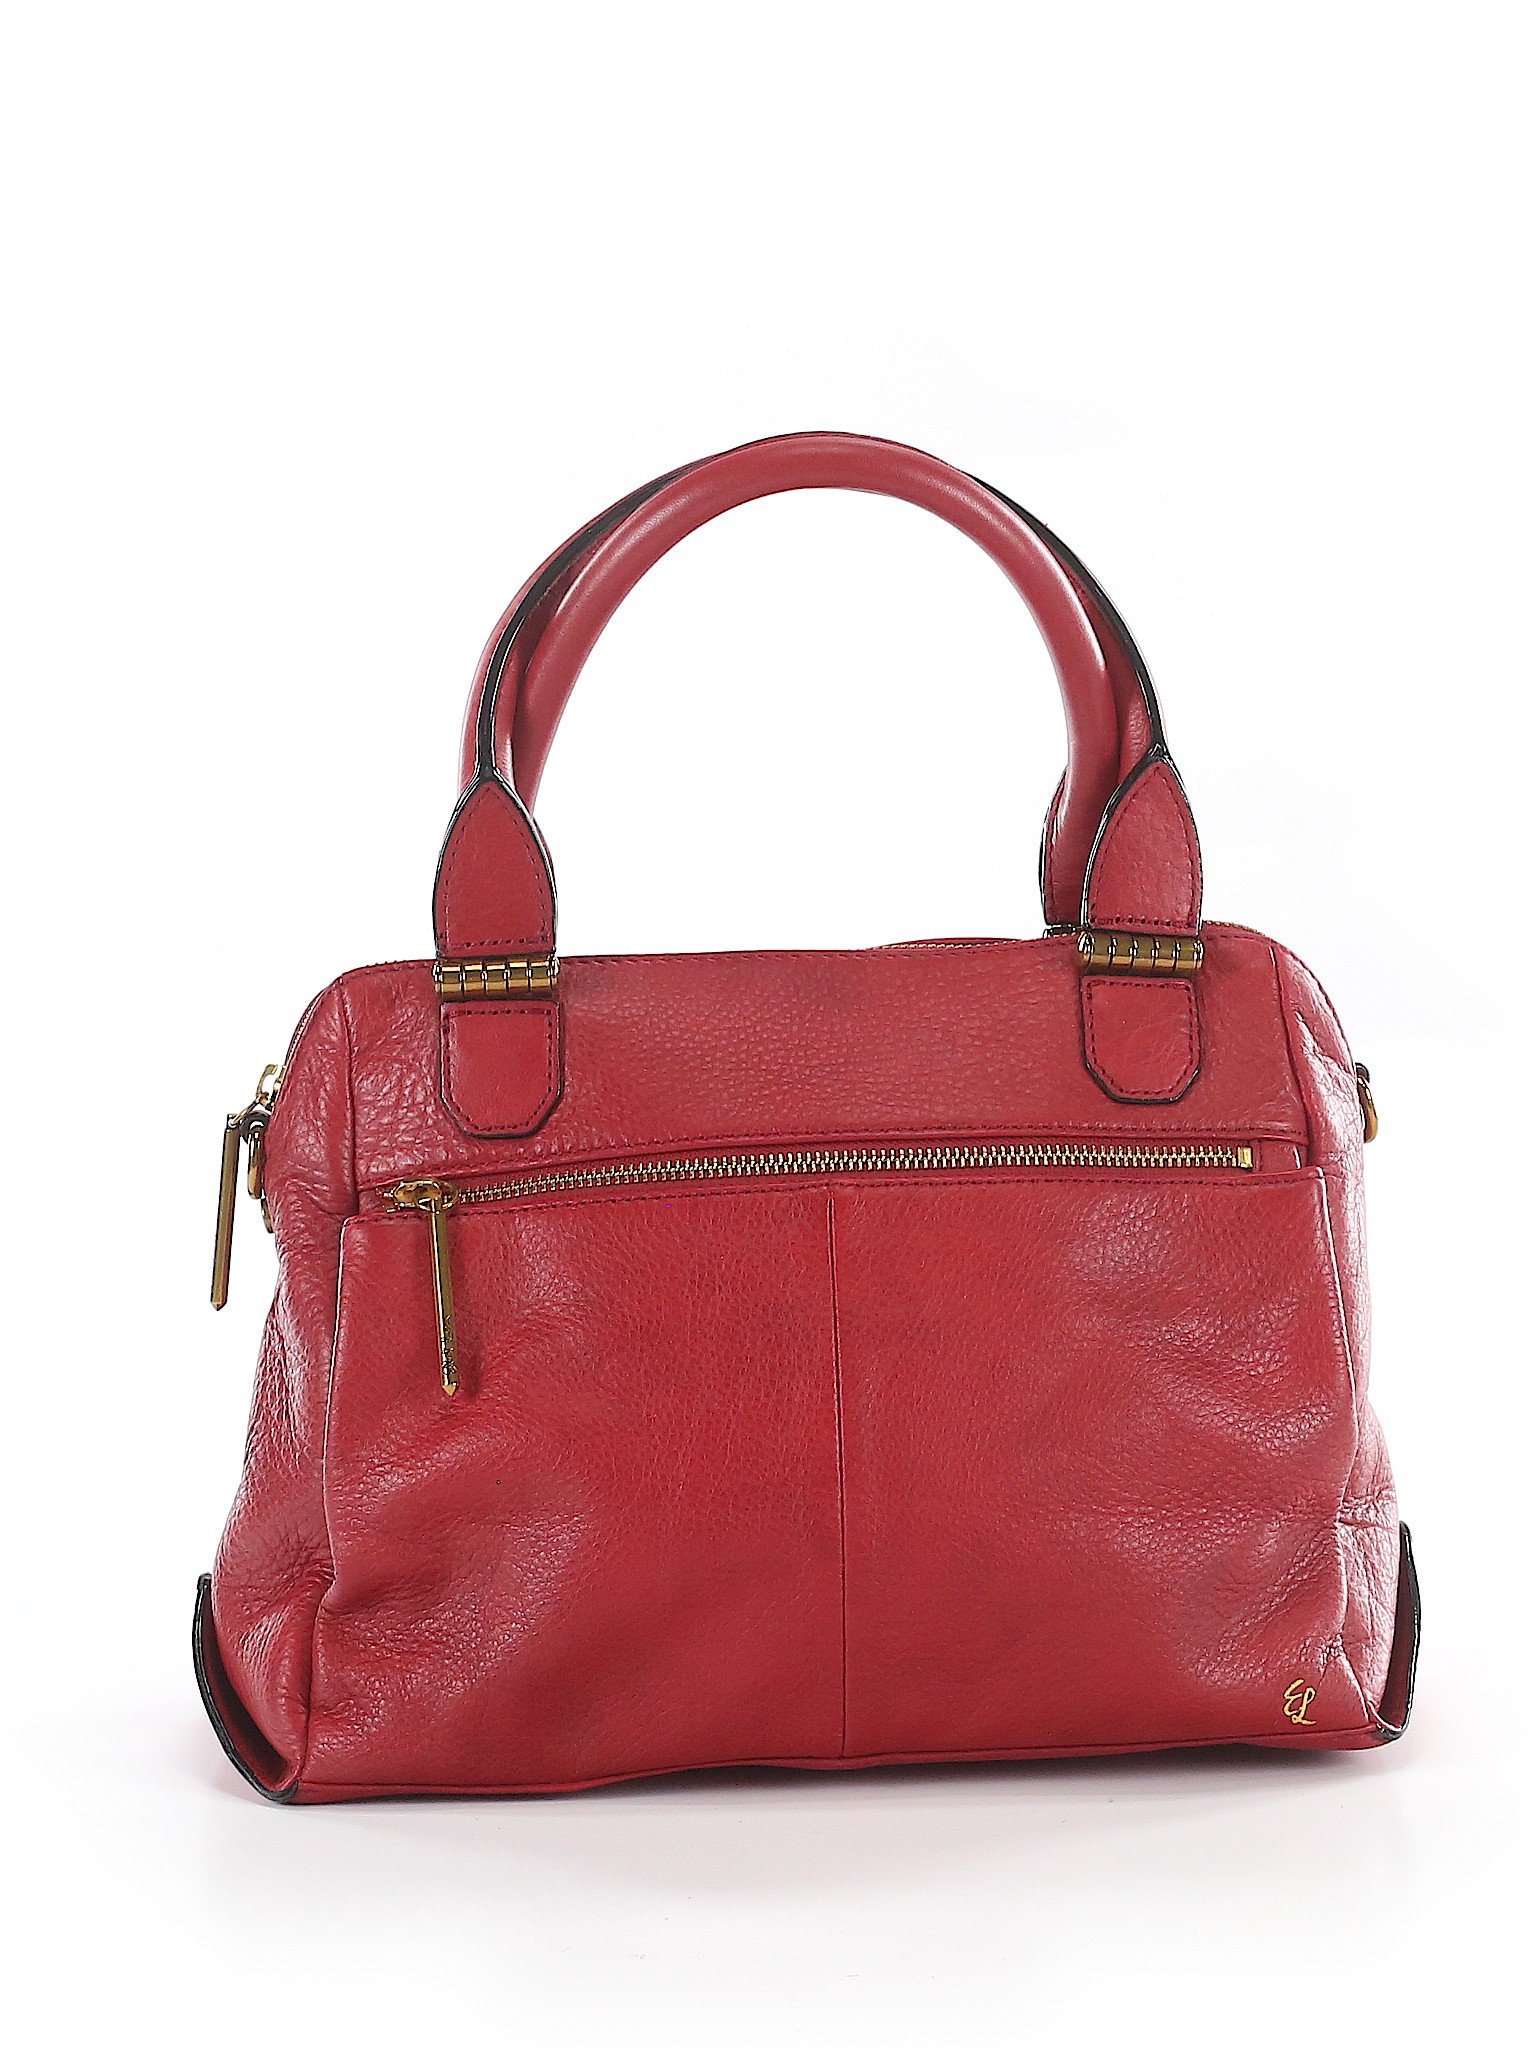 Elliott Lucca 100% Leather Red Leather Satchel One Size - 80% off | thredUP